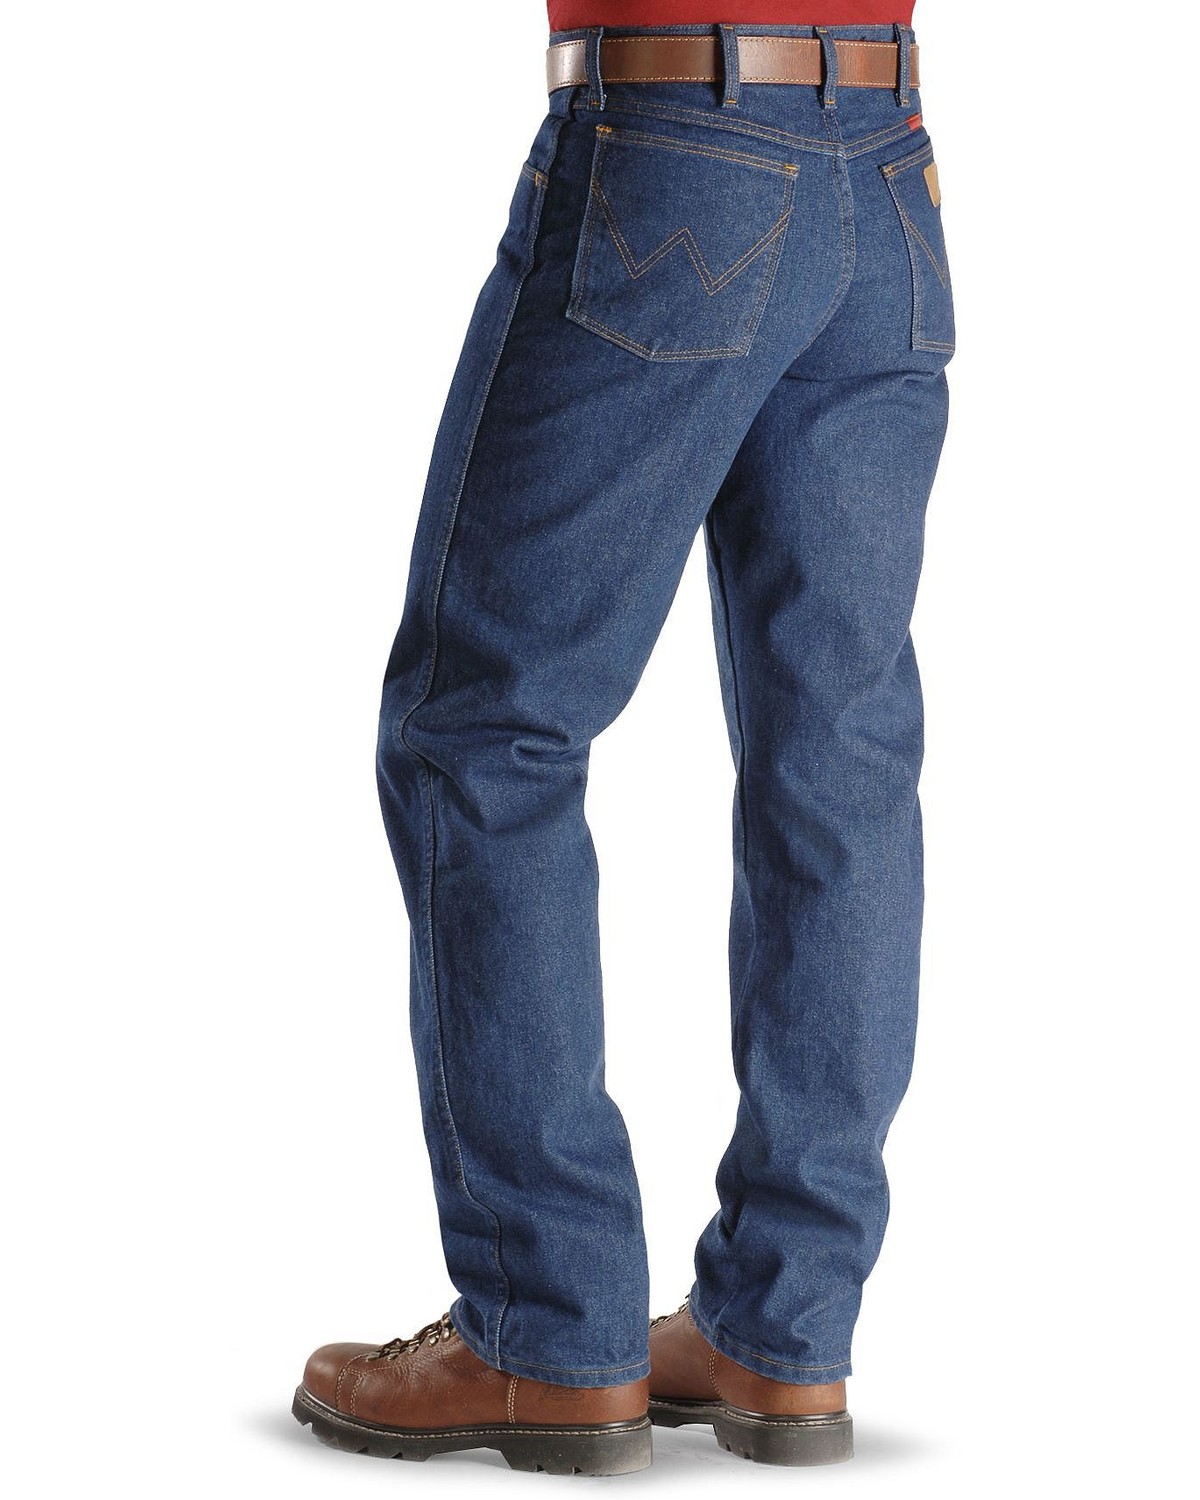 Wrangler 31MWZ FR Flame Resistant Relaxed Fit Jeans - Country Outfitter